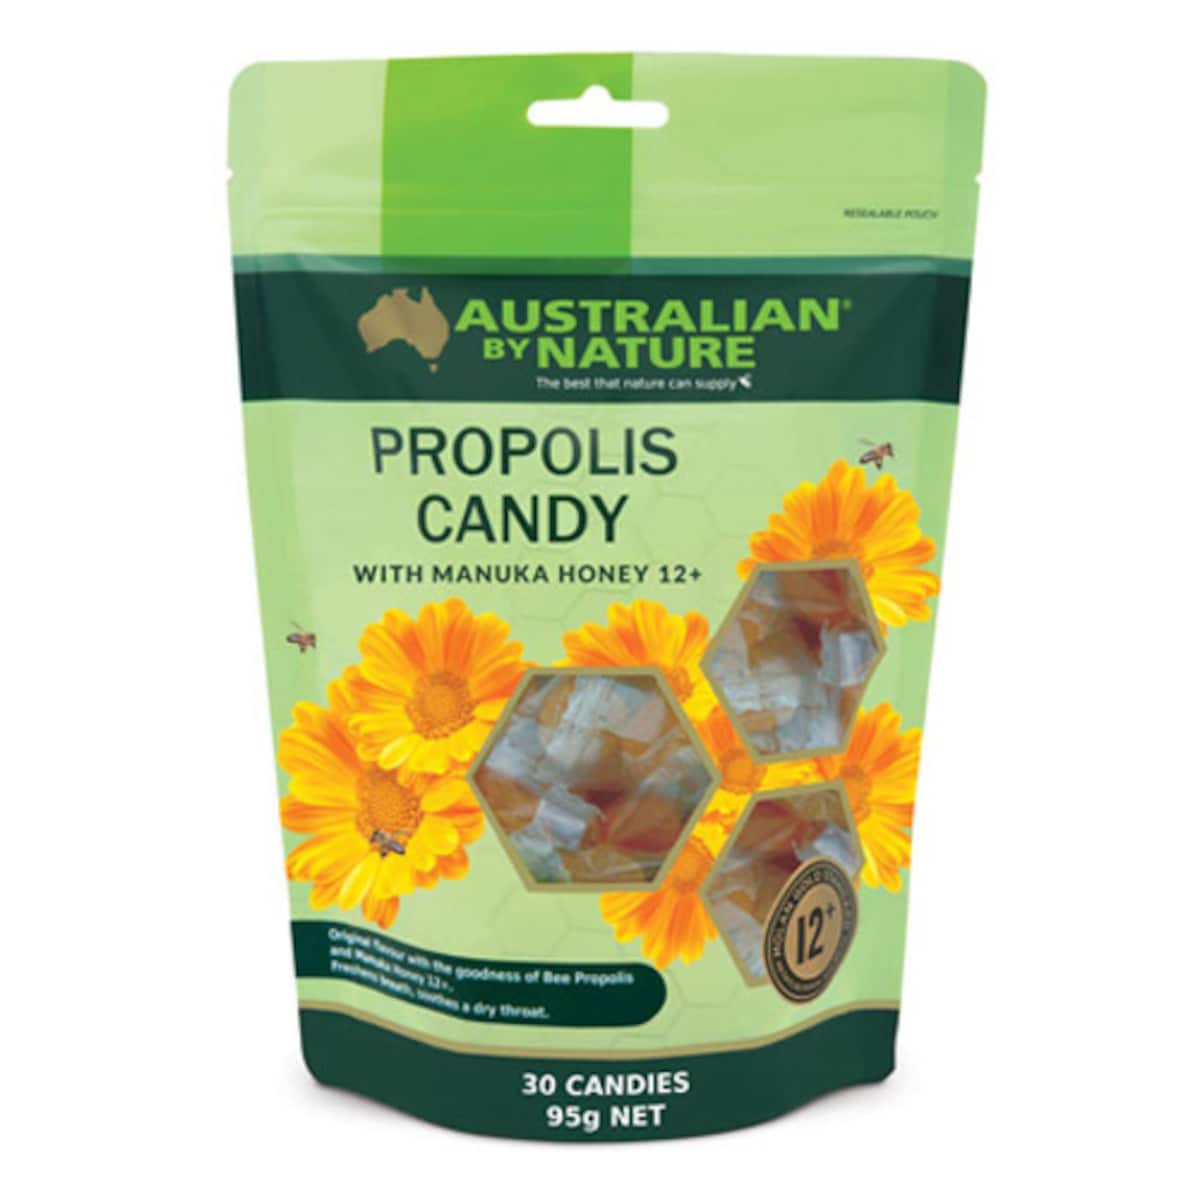 Australian by Nature Propolis Candy with Manuka Honey 30 Candies Australia